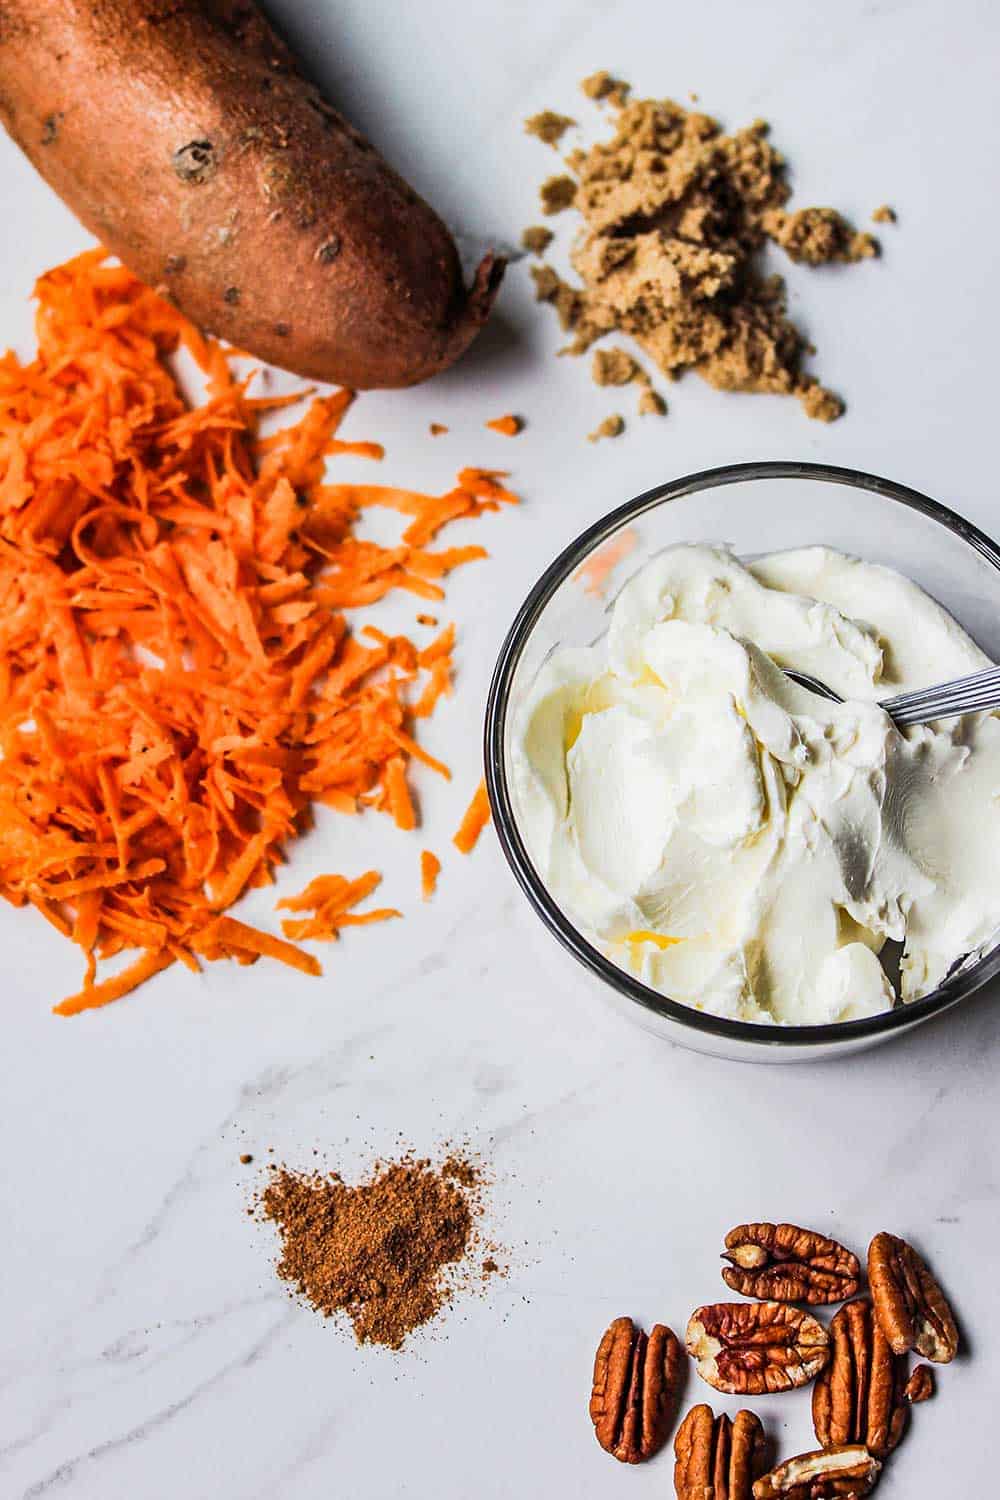 Shredded sweet potatoes next to a whole sweet potato and bowl of cream cheese and pecans. 